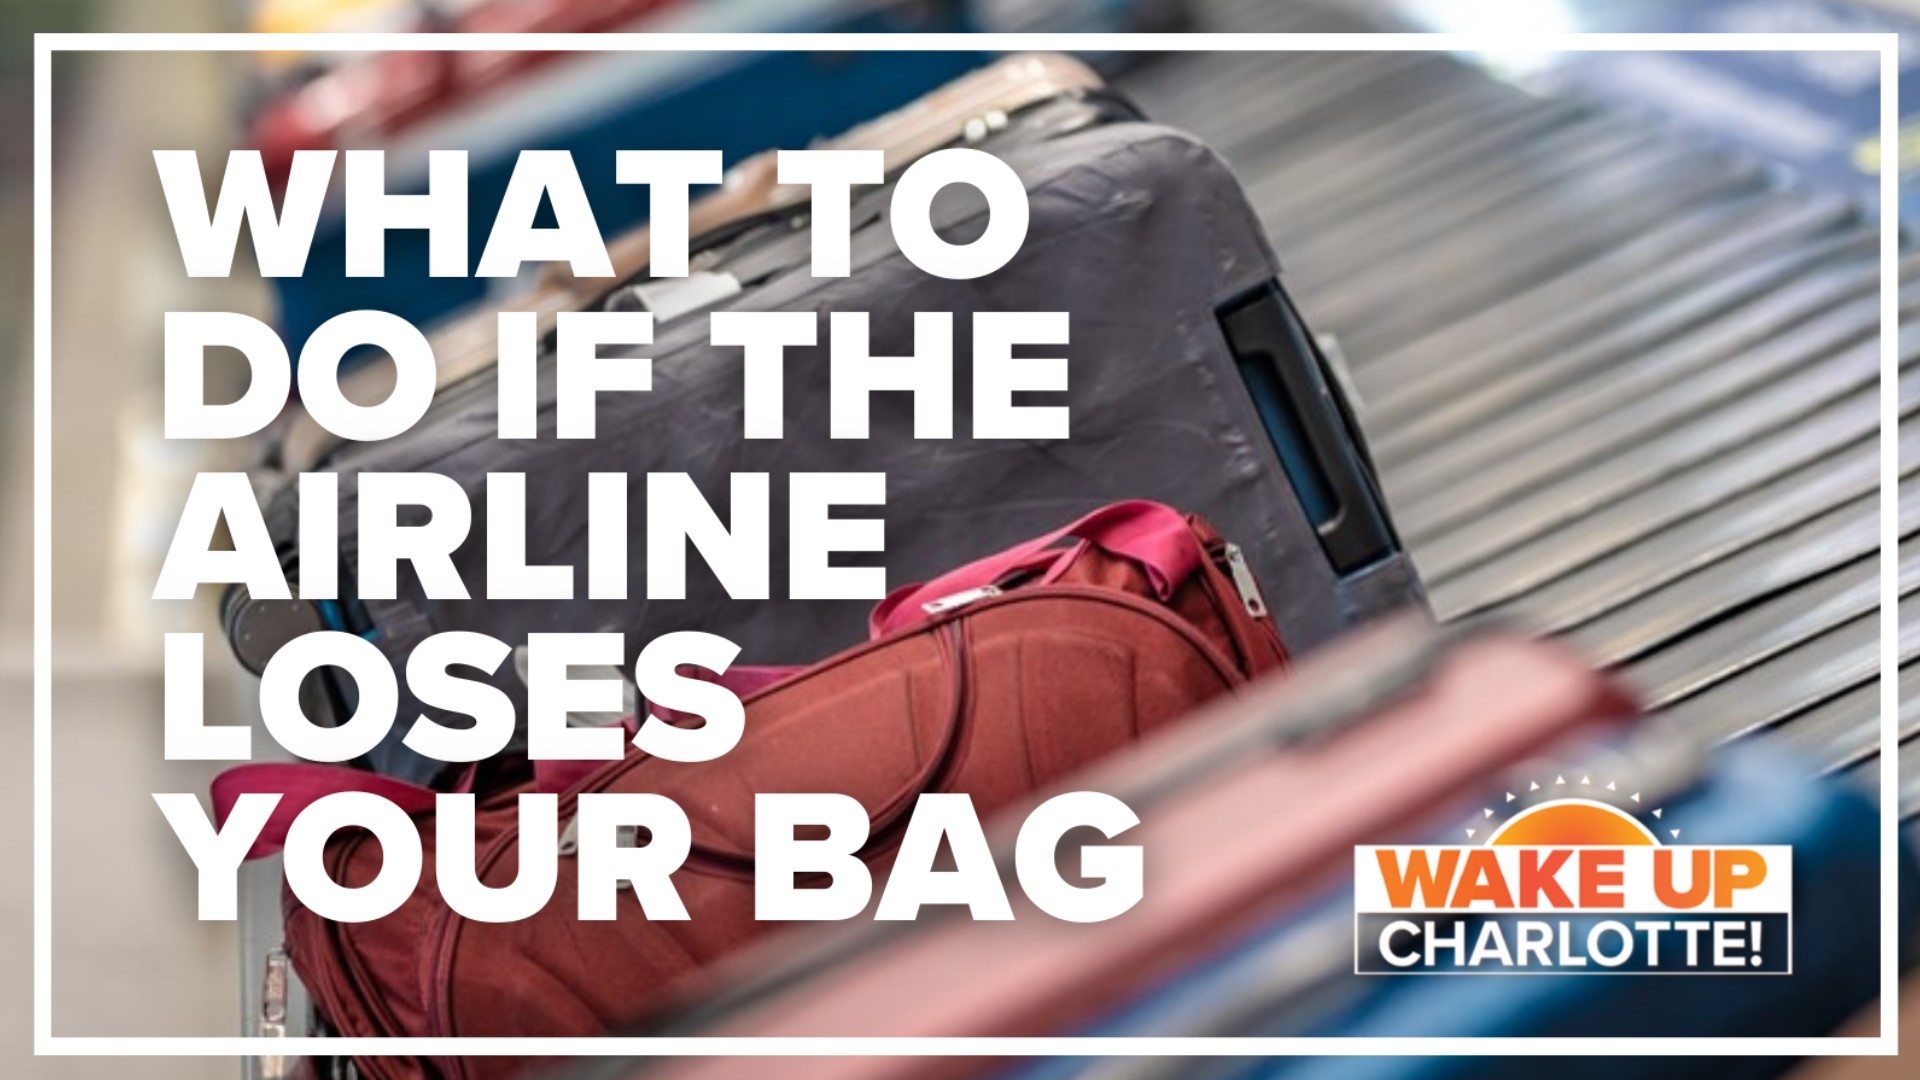 More than 648,000 bags were lost in the first quarter of 2022. Here's how you can ensure the airlines pay for losing your bag.